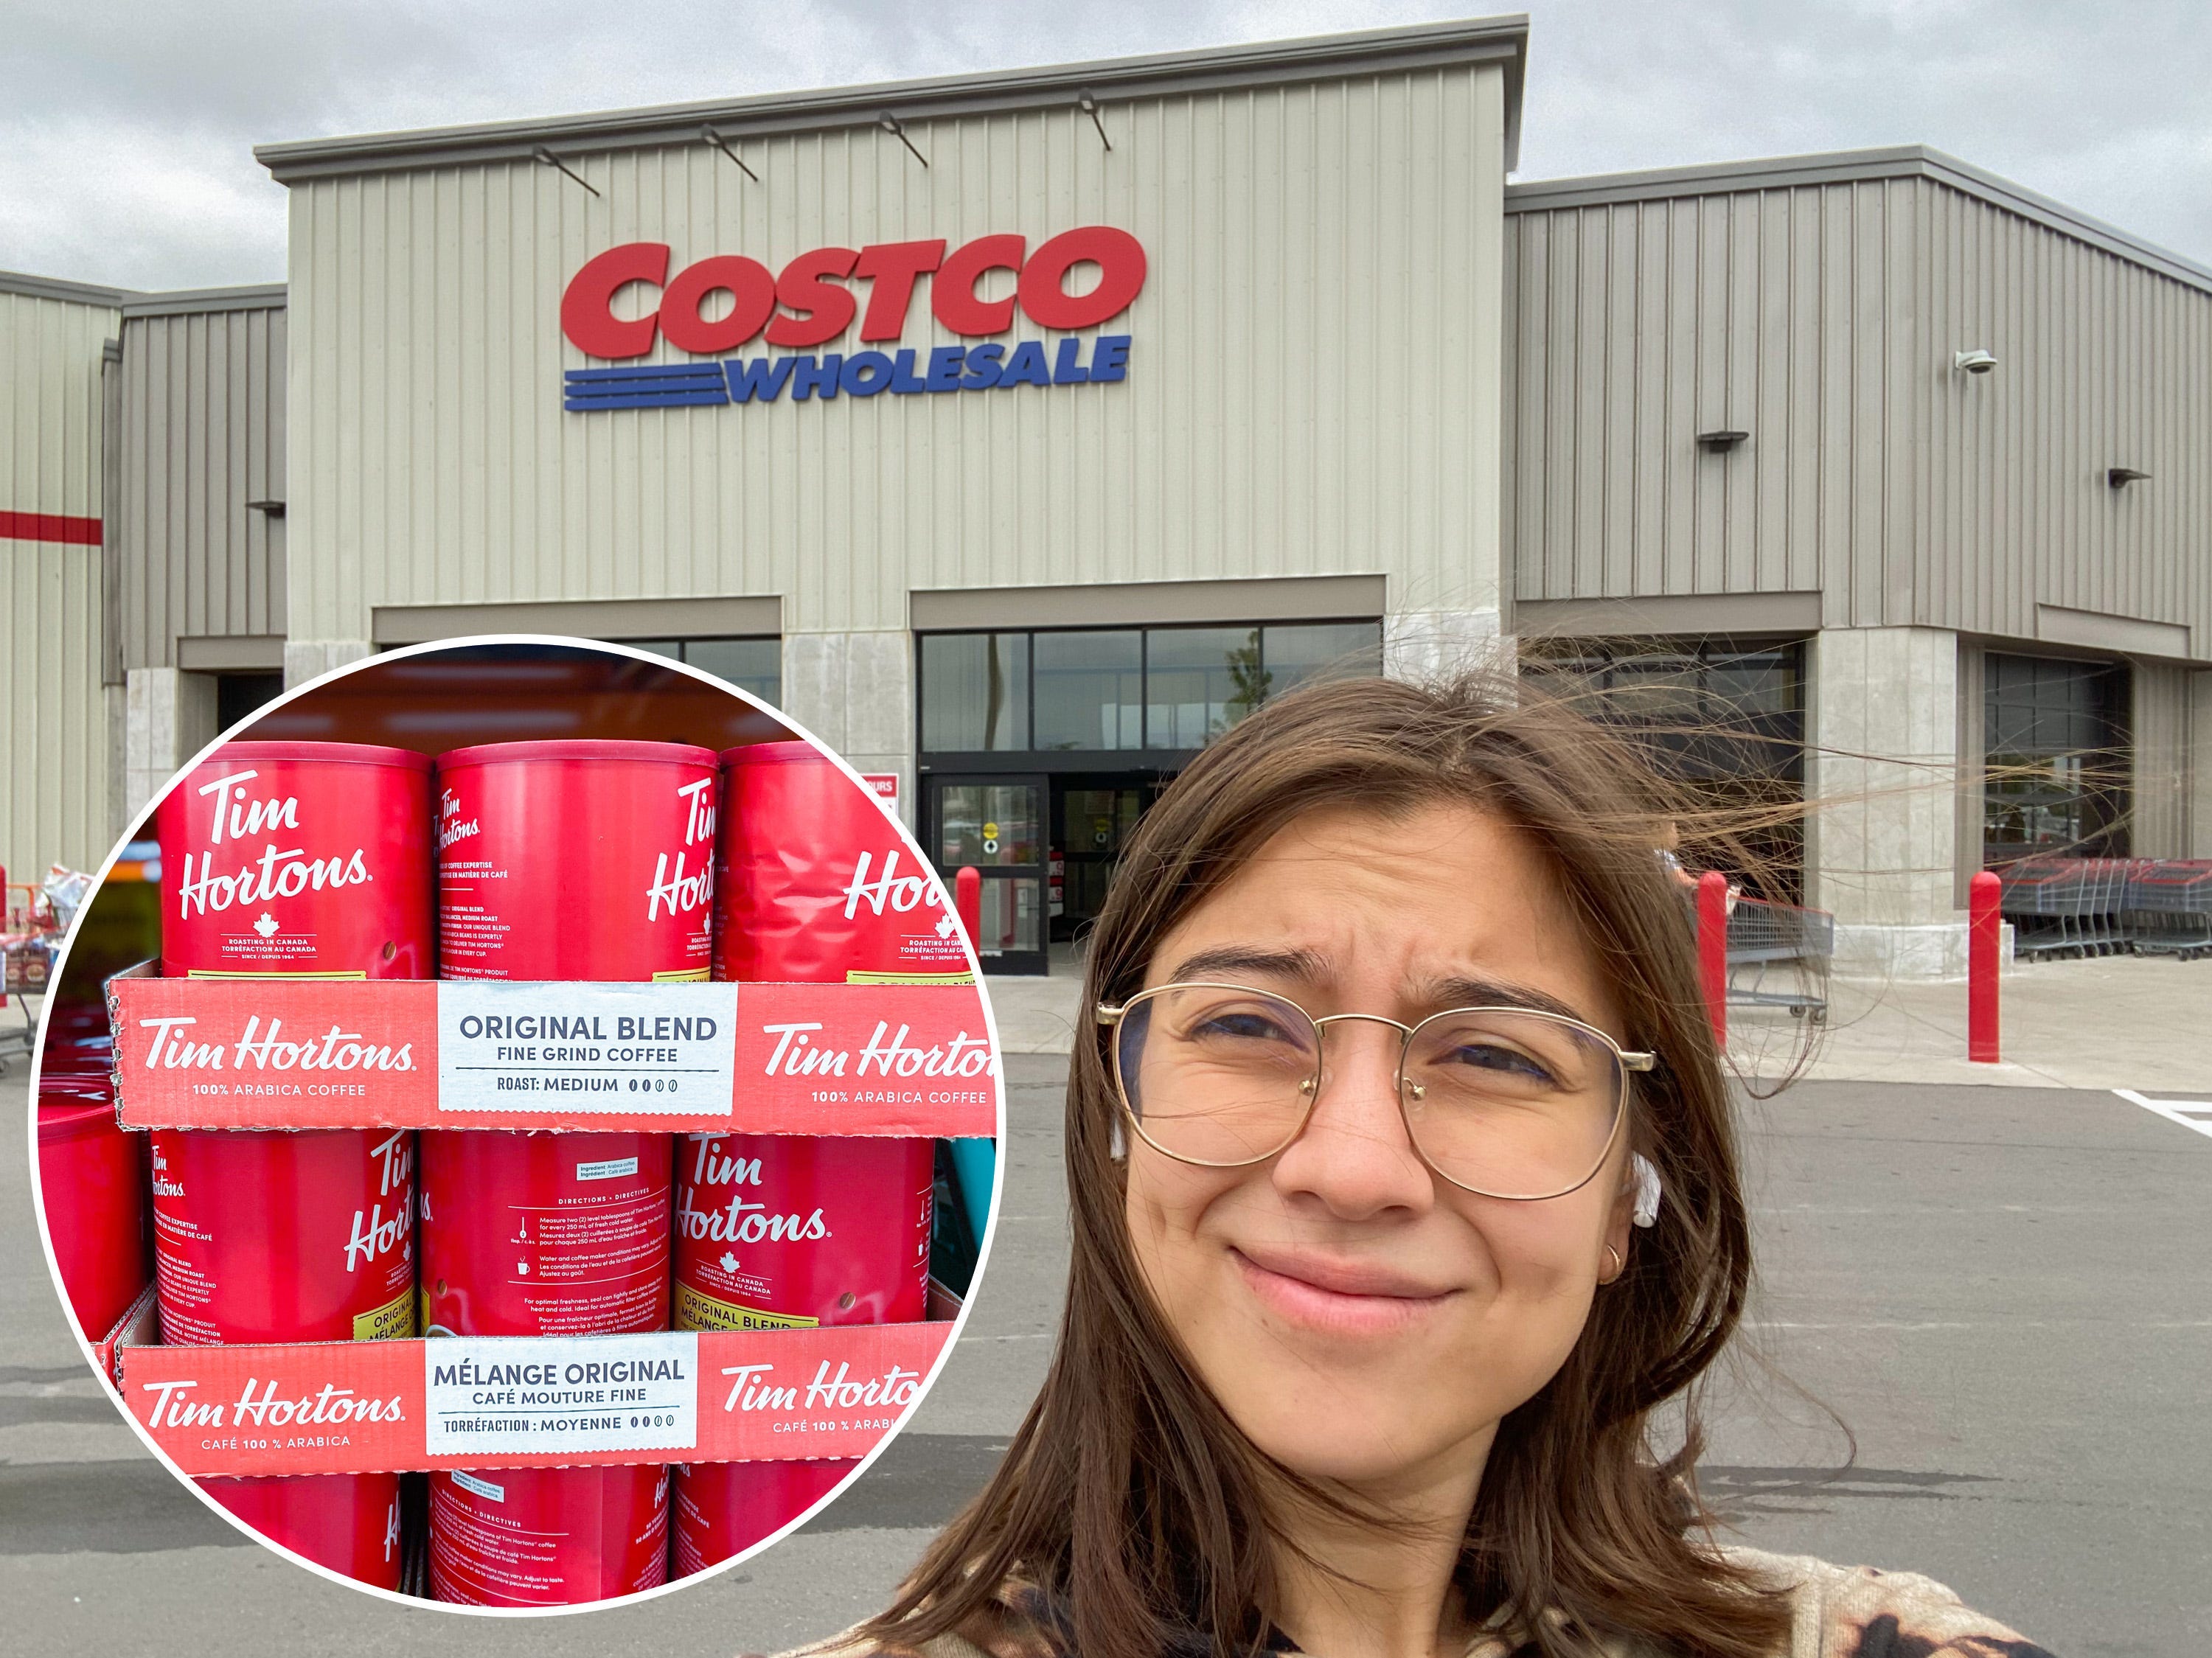 <ul class="summary-list"> <li>Costco has more than 100 locations in Canada. </li> <li>On a recent trip there, I visited a Costco in Niagara Falls to see how it compared to US locations.</li> <li>The Costco I visited looked identical to those in the US, but there were a few key differences.</li> </ul><div class="read-original">Read the original article on <a href="https://www.insider.com/how-costco-canada-compares-to-us-photos-2022-9">Insider</a></div>